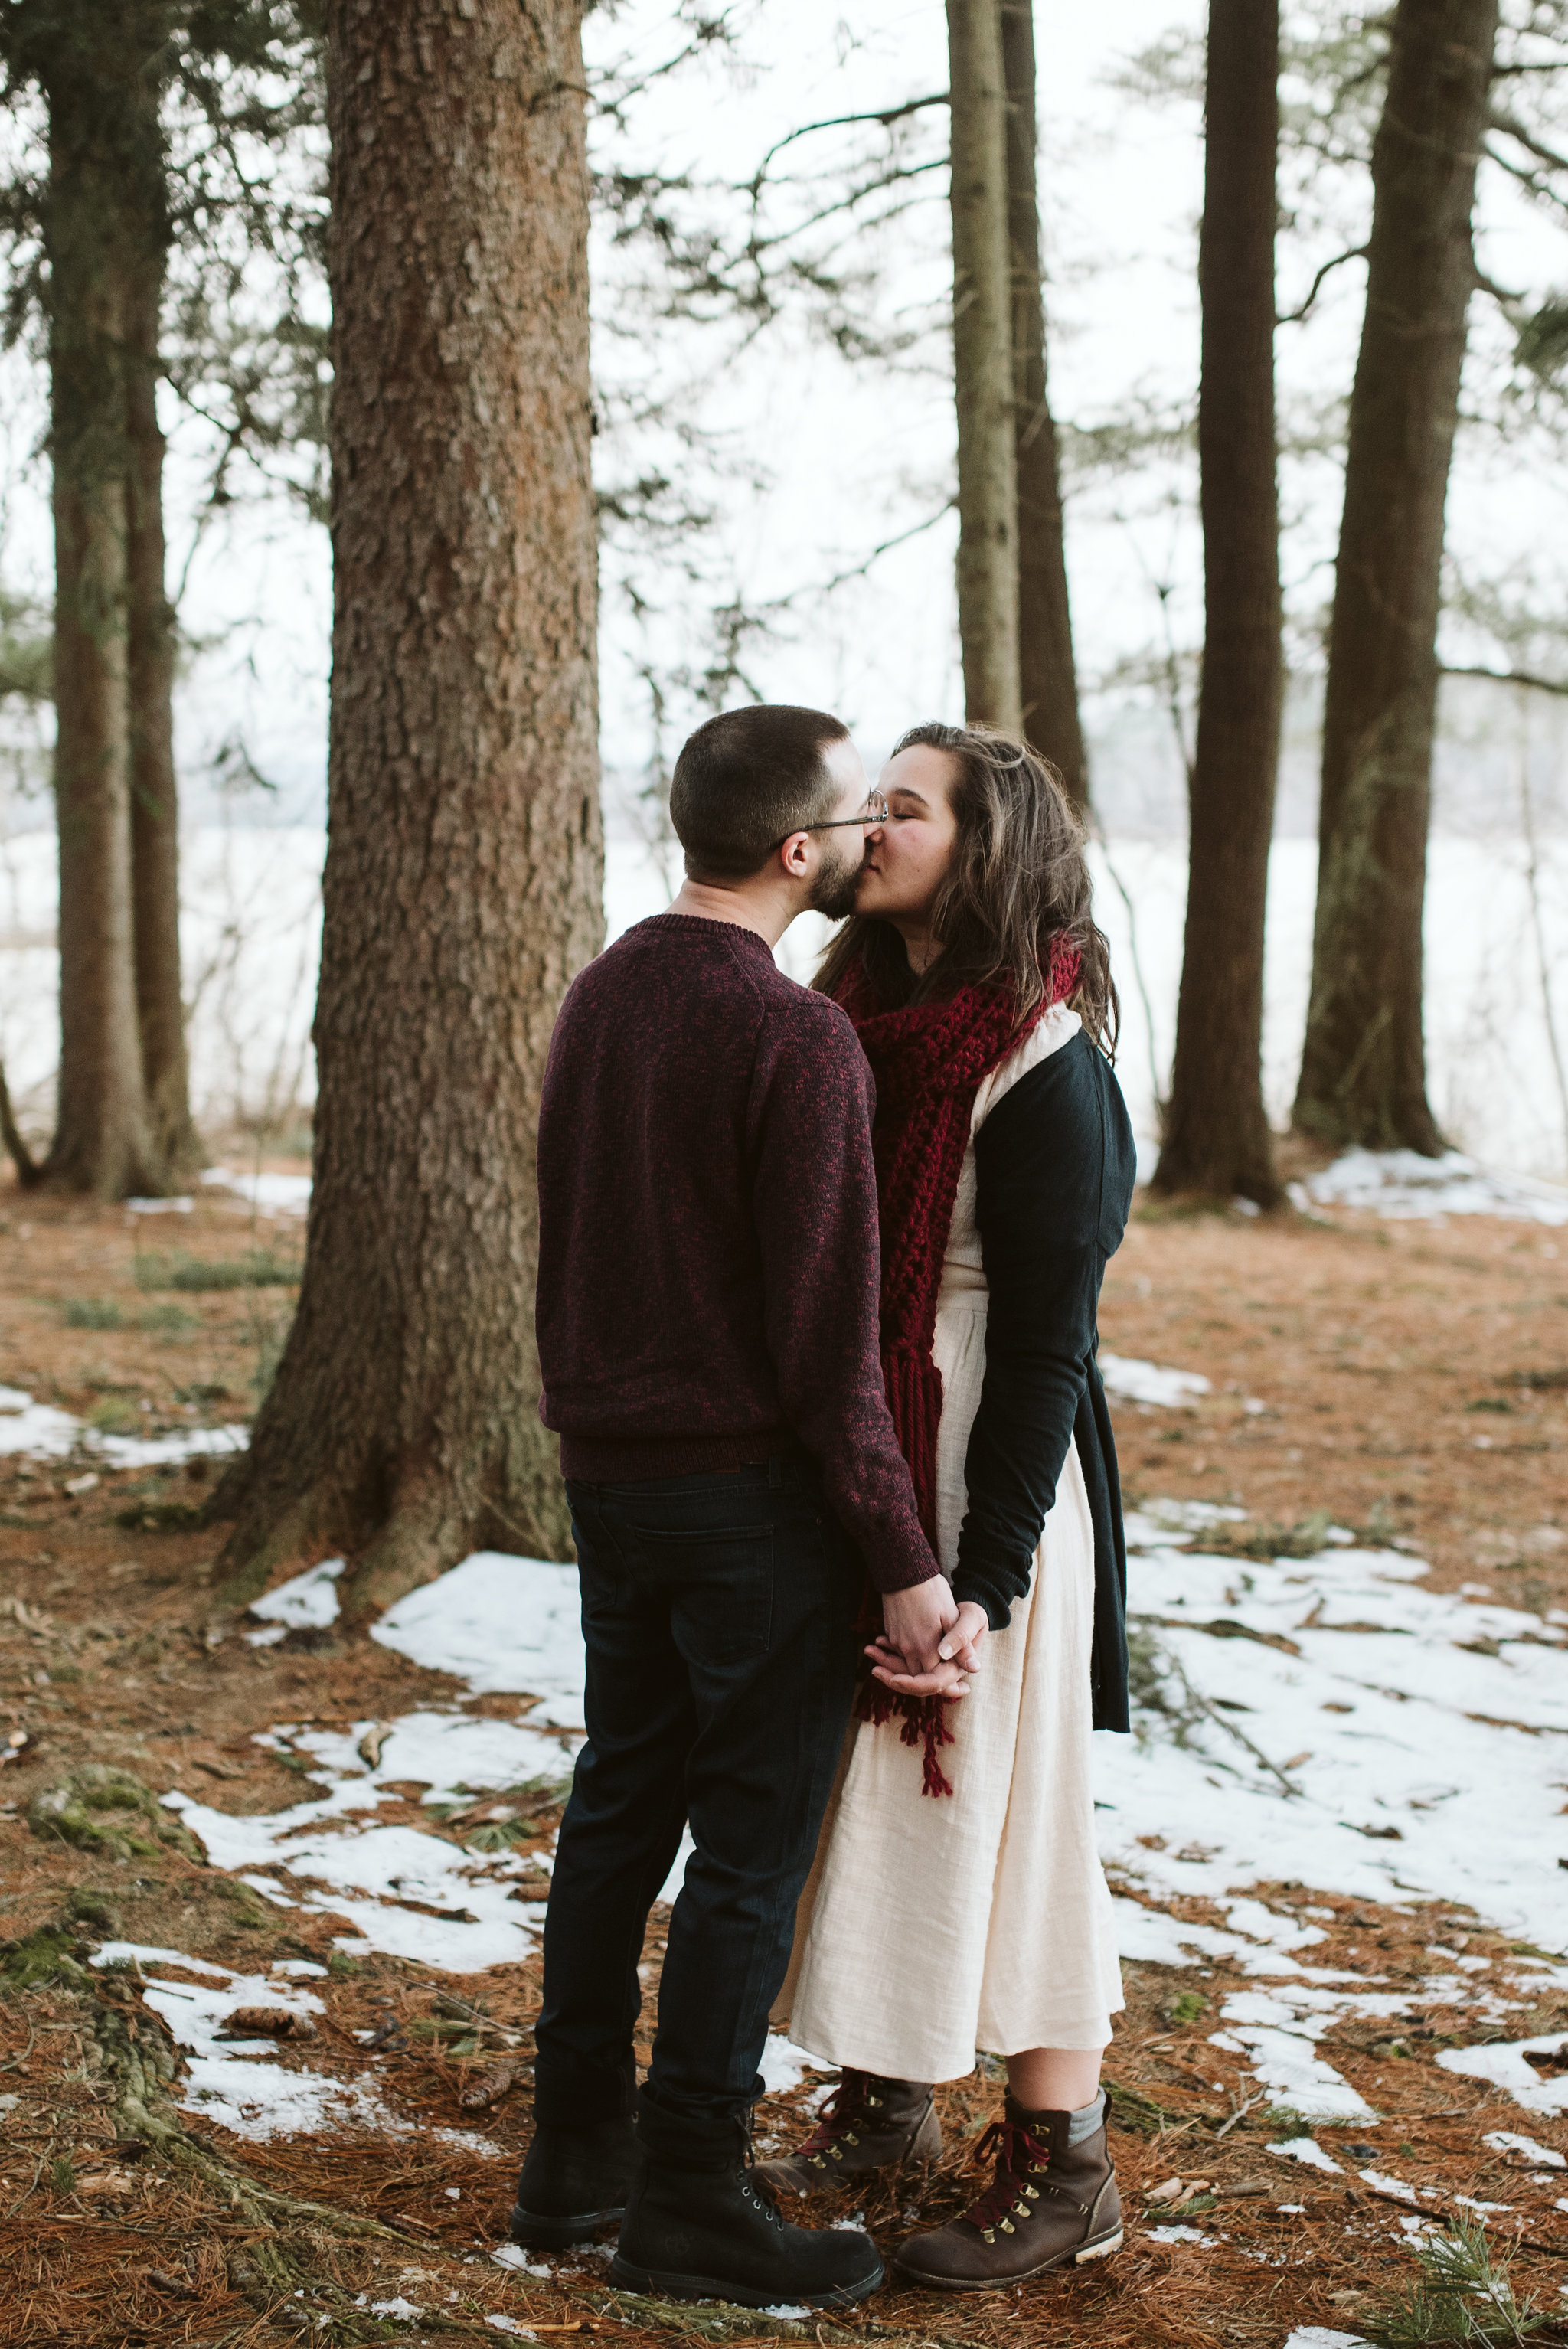  Baltimore County, Loch Raven Reservoir, Maryland Wedding Photographer, Winter, Engagement Photos, Nature, Romantic, Clean and Classic, Bride and Groom Kissing in the Trees, White Dress, Burgundy Sweater 